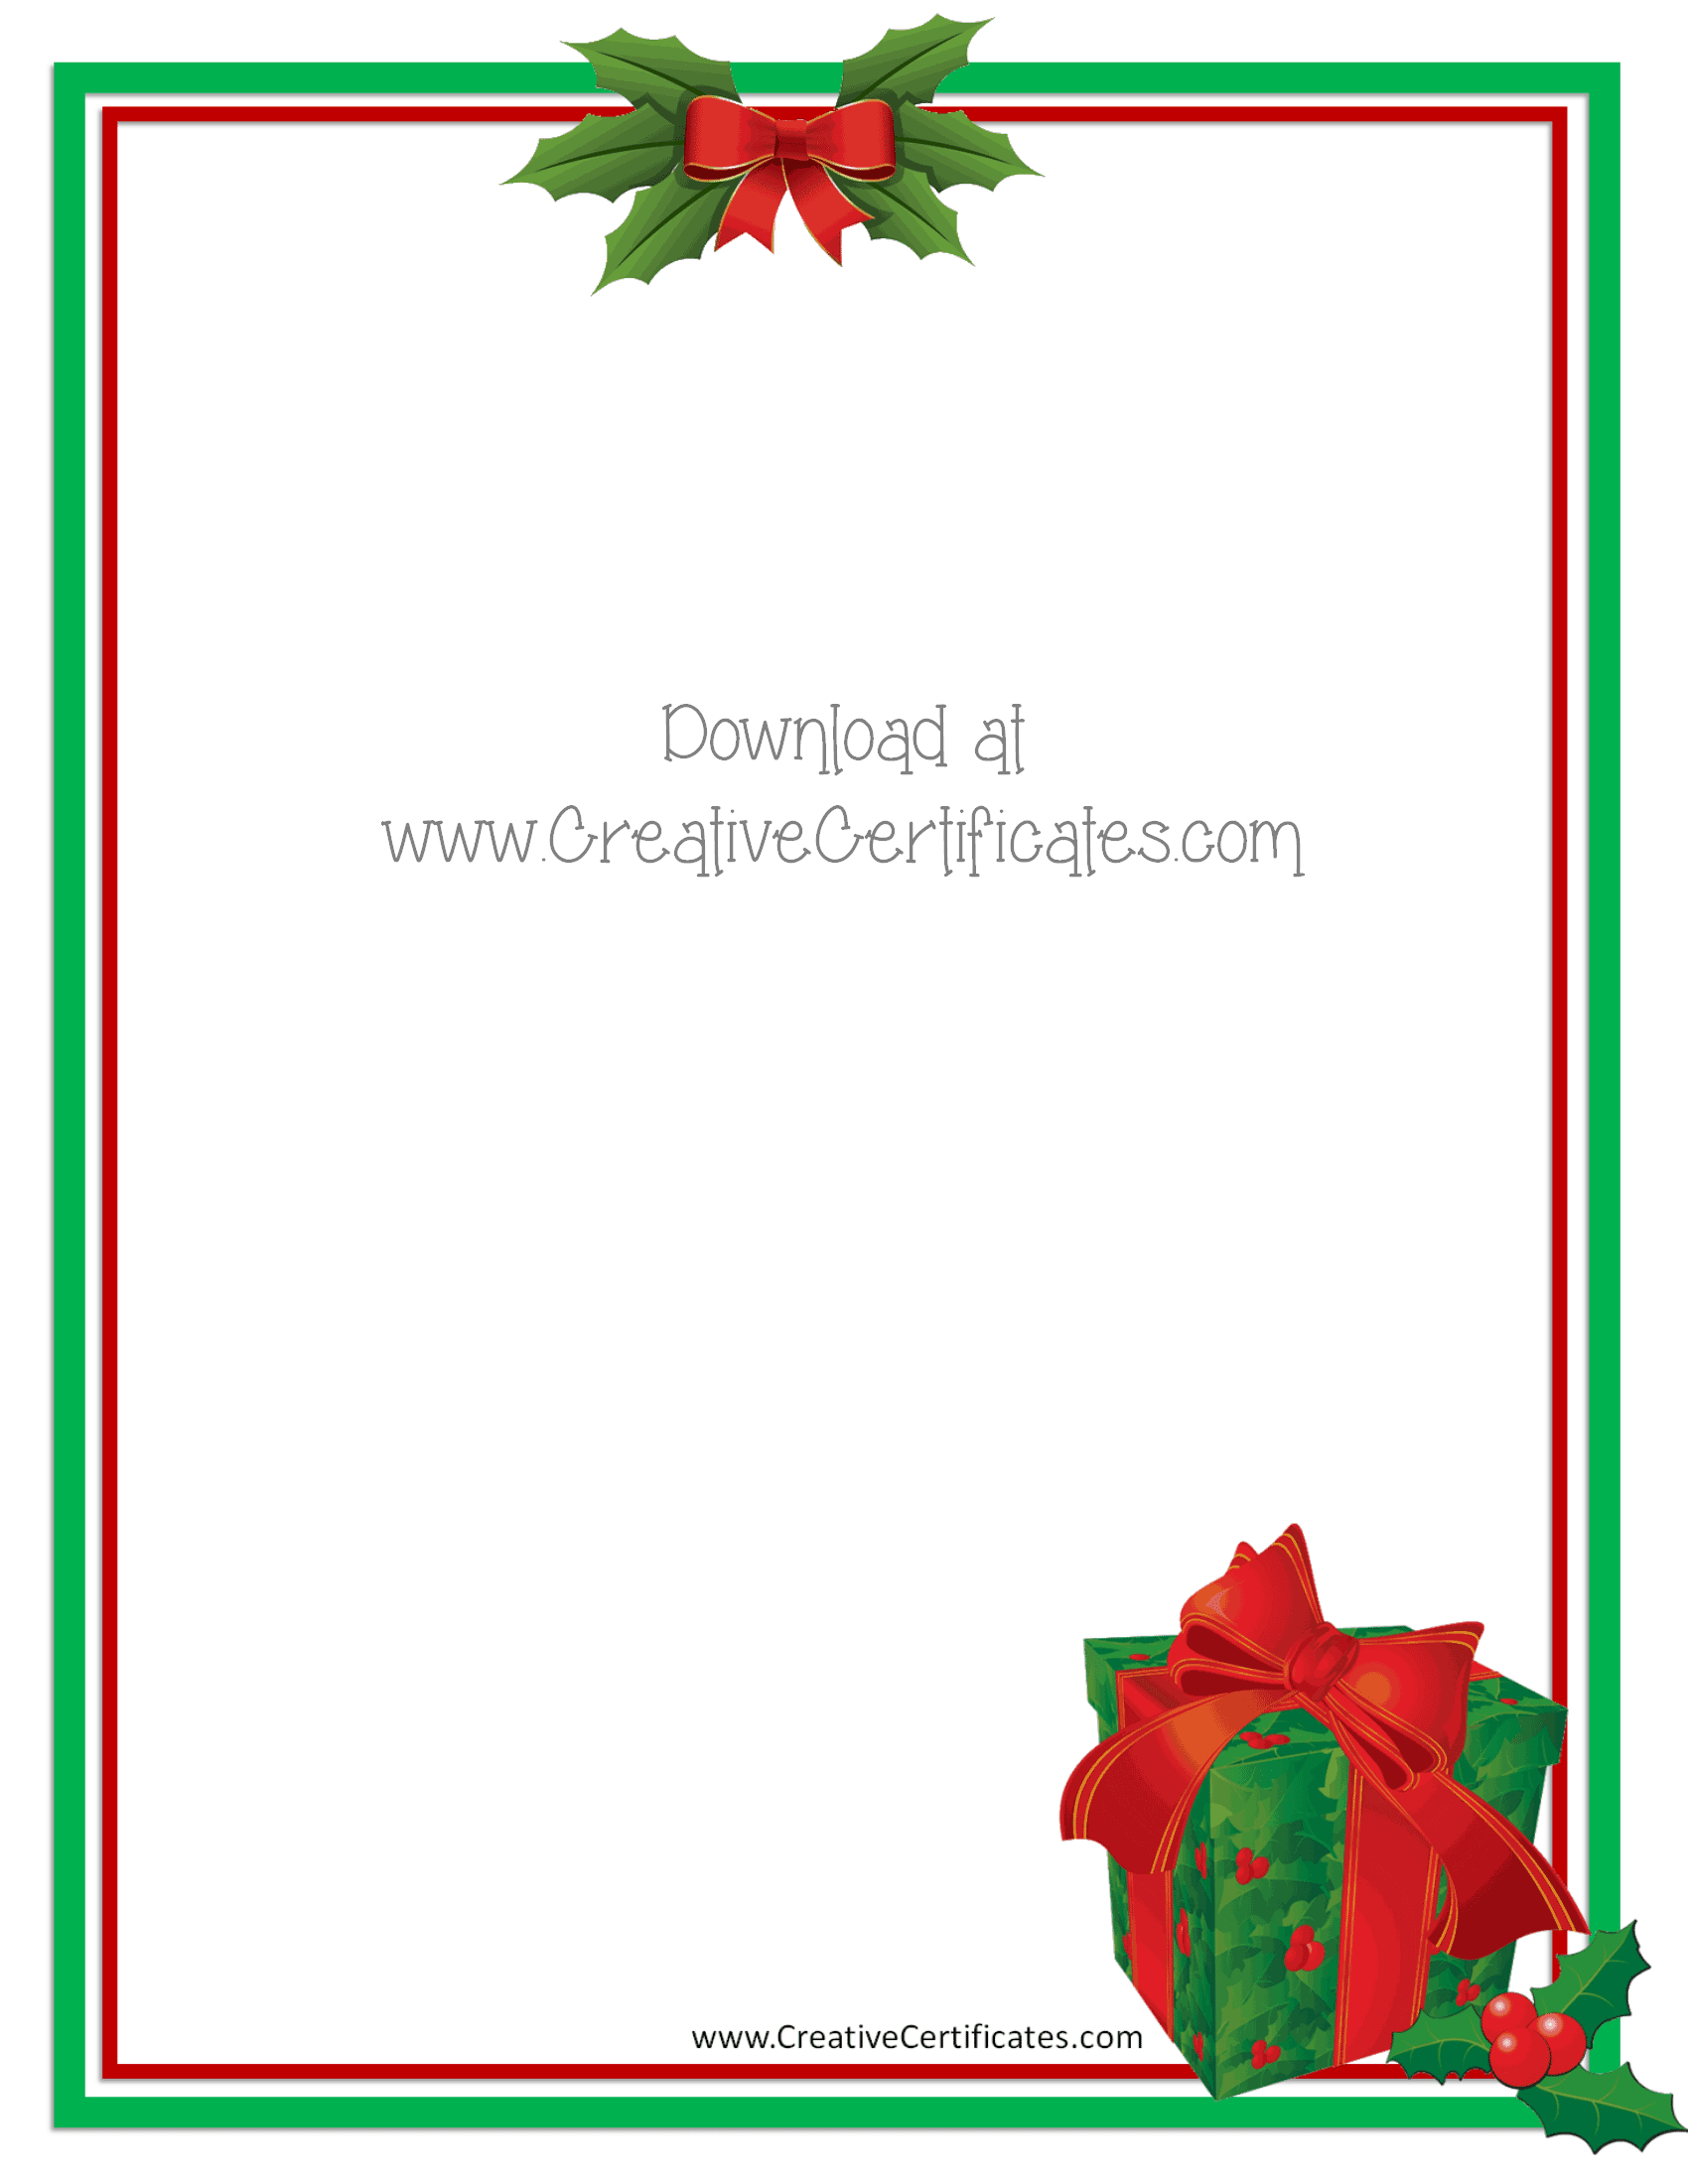 Free Christmas Border Templates - Customize Online Then Download - Free Printable Christmas Backgrounds